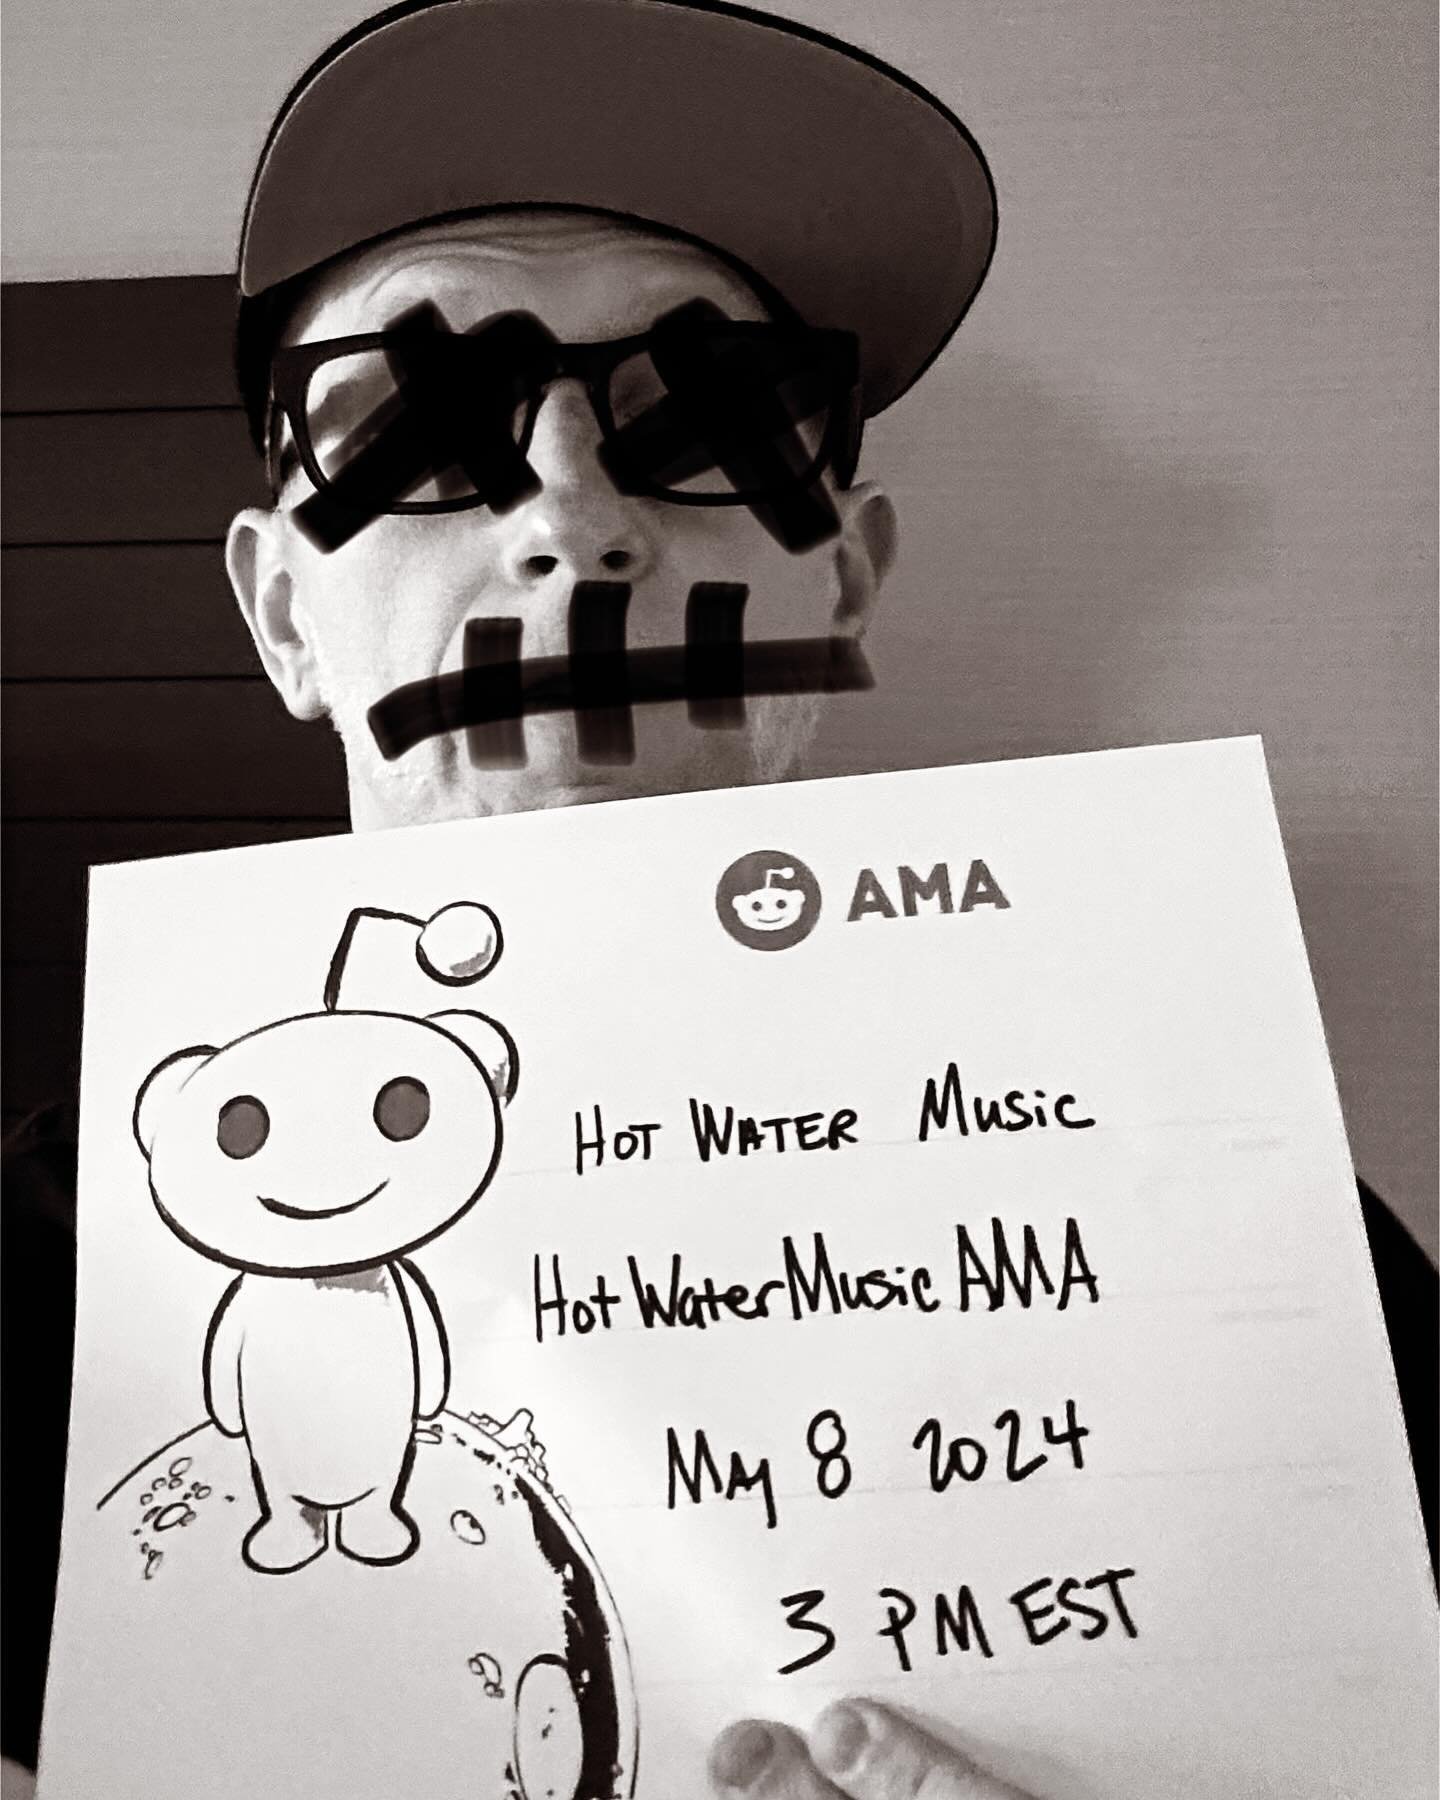 We&rsquo;re doing an AMA on reddit Wednesday from 3-4 pm eastern to get the vibes up for the VOWS release date. r/Music